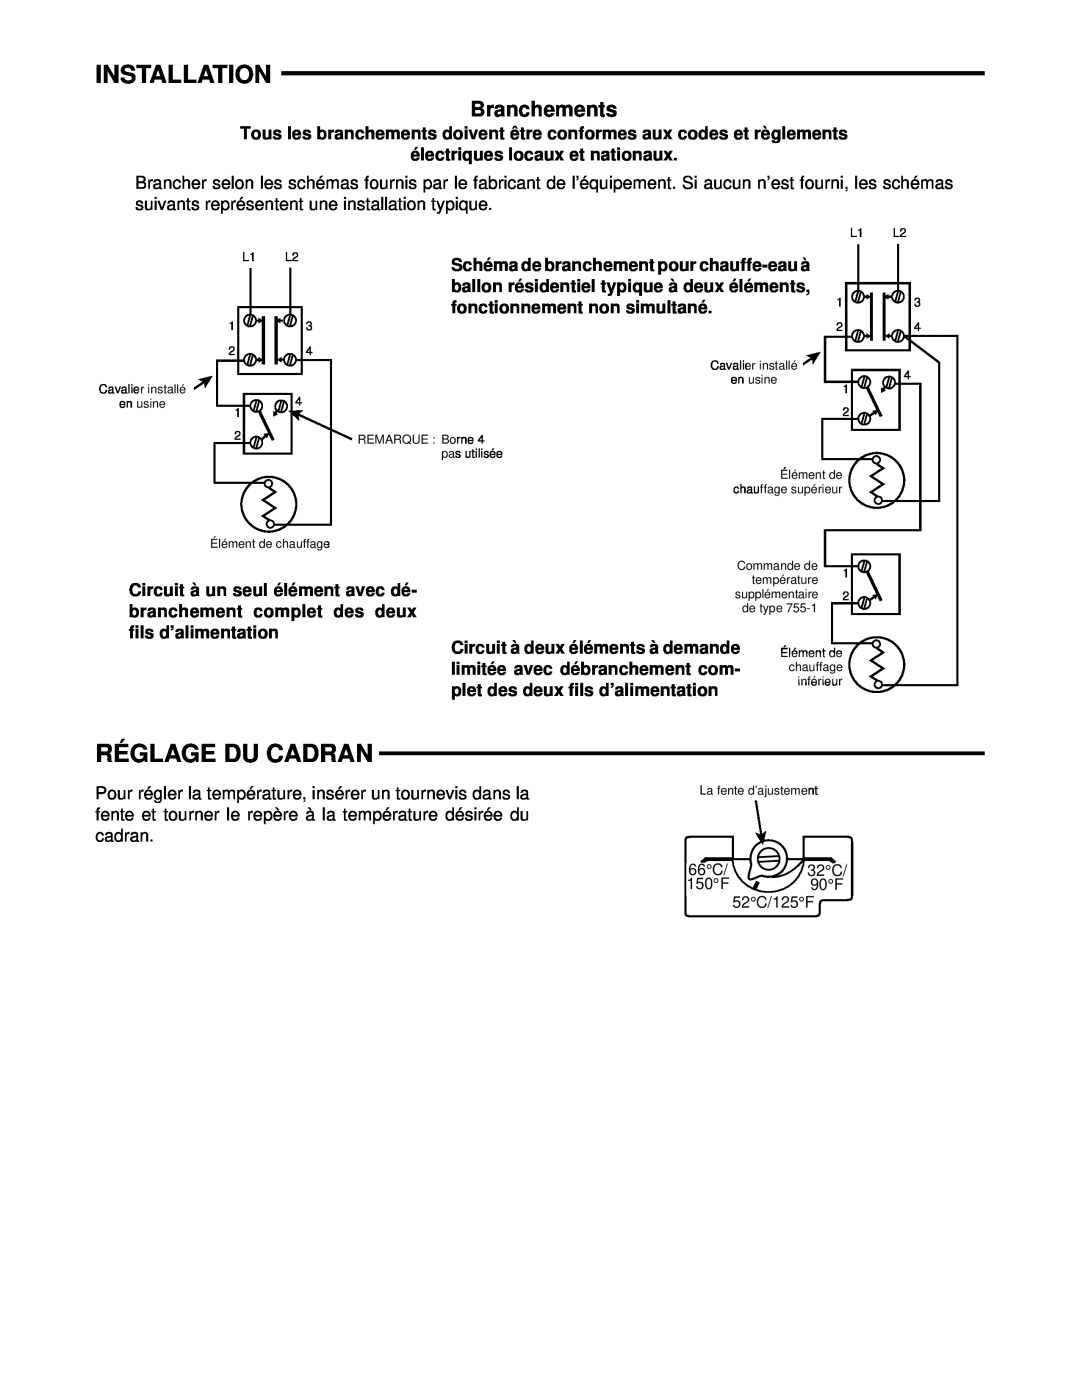 White Rodgers 37-5785A specifications Réglage Du Cadran, Branchements, Installation 